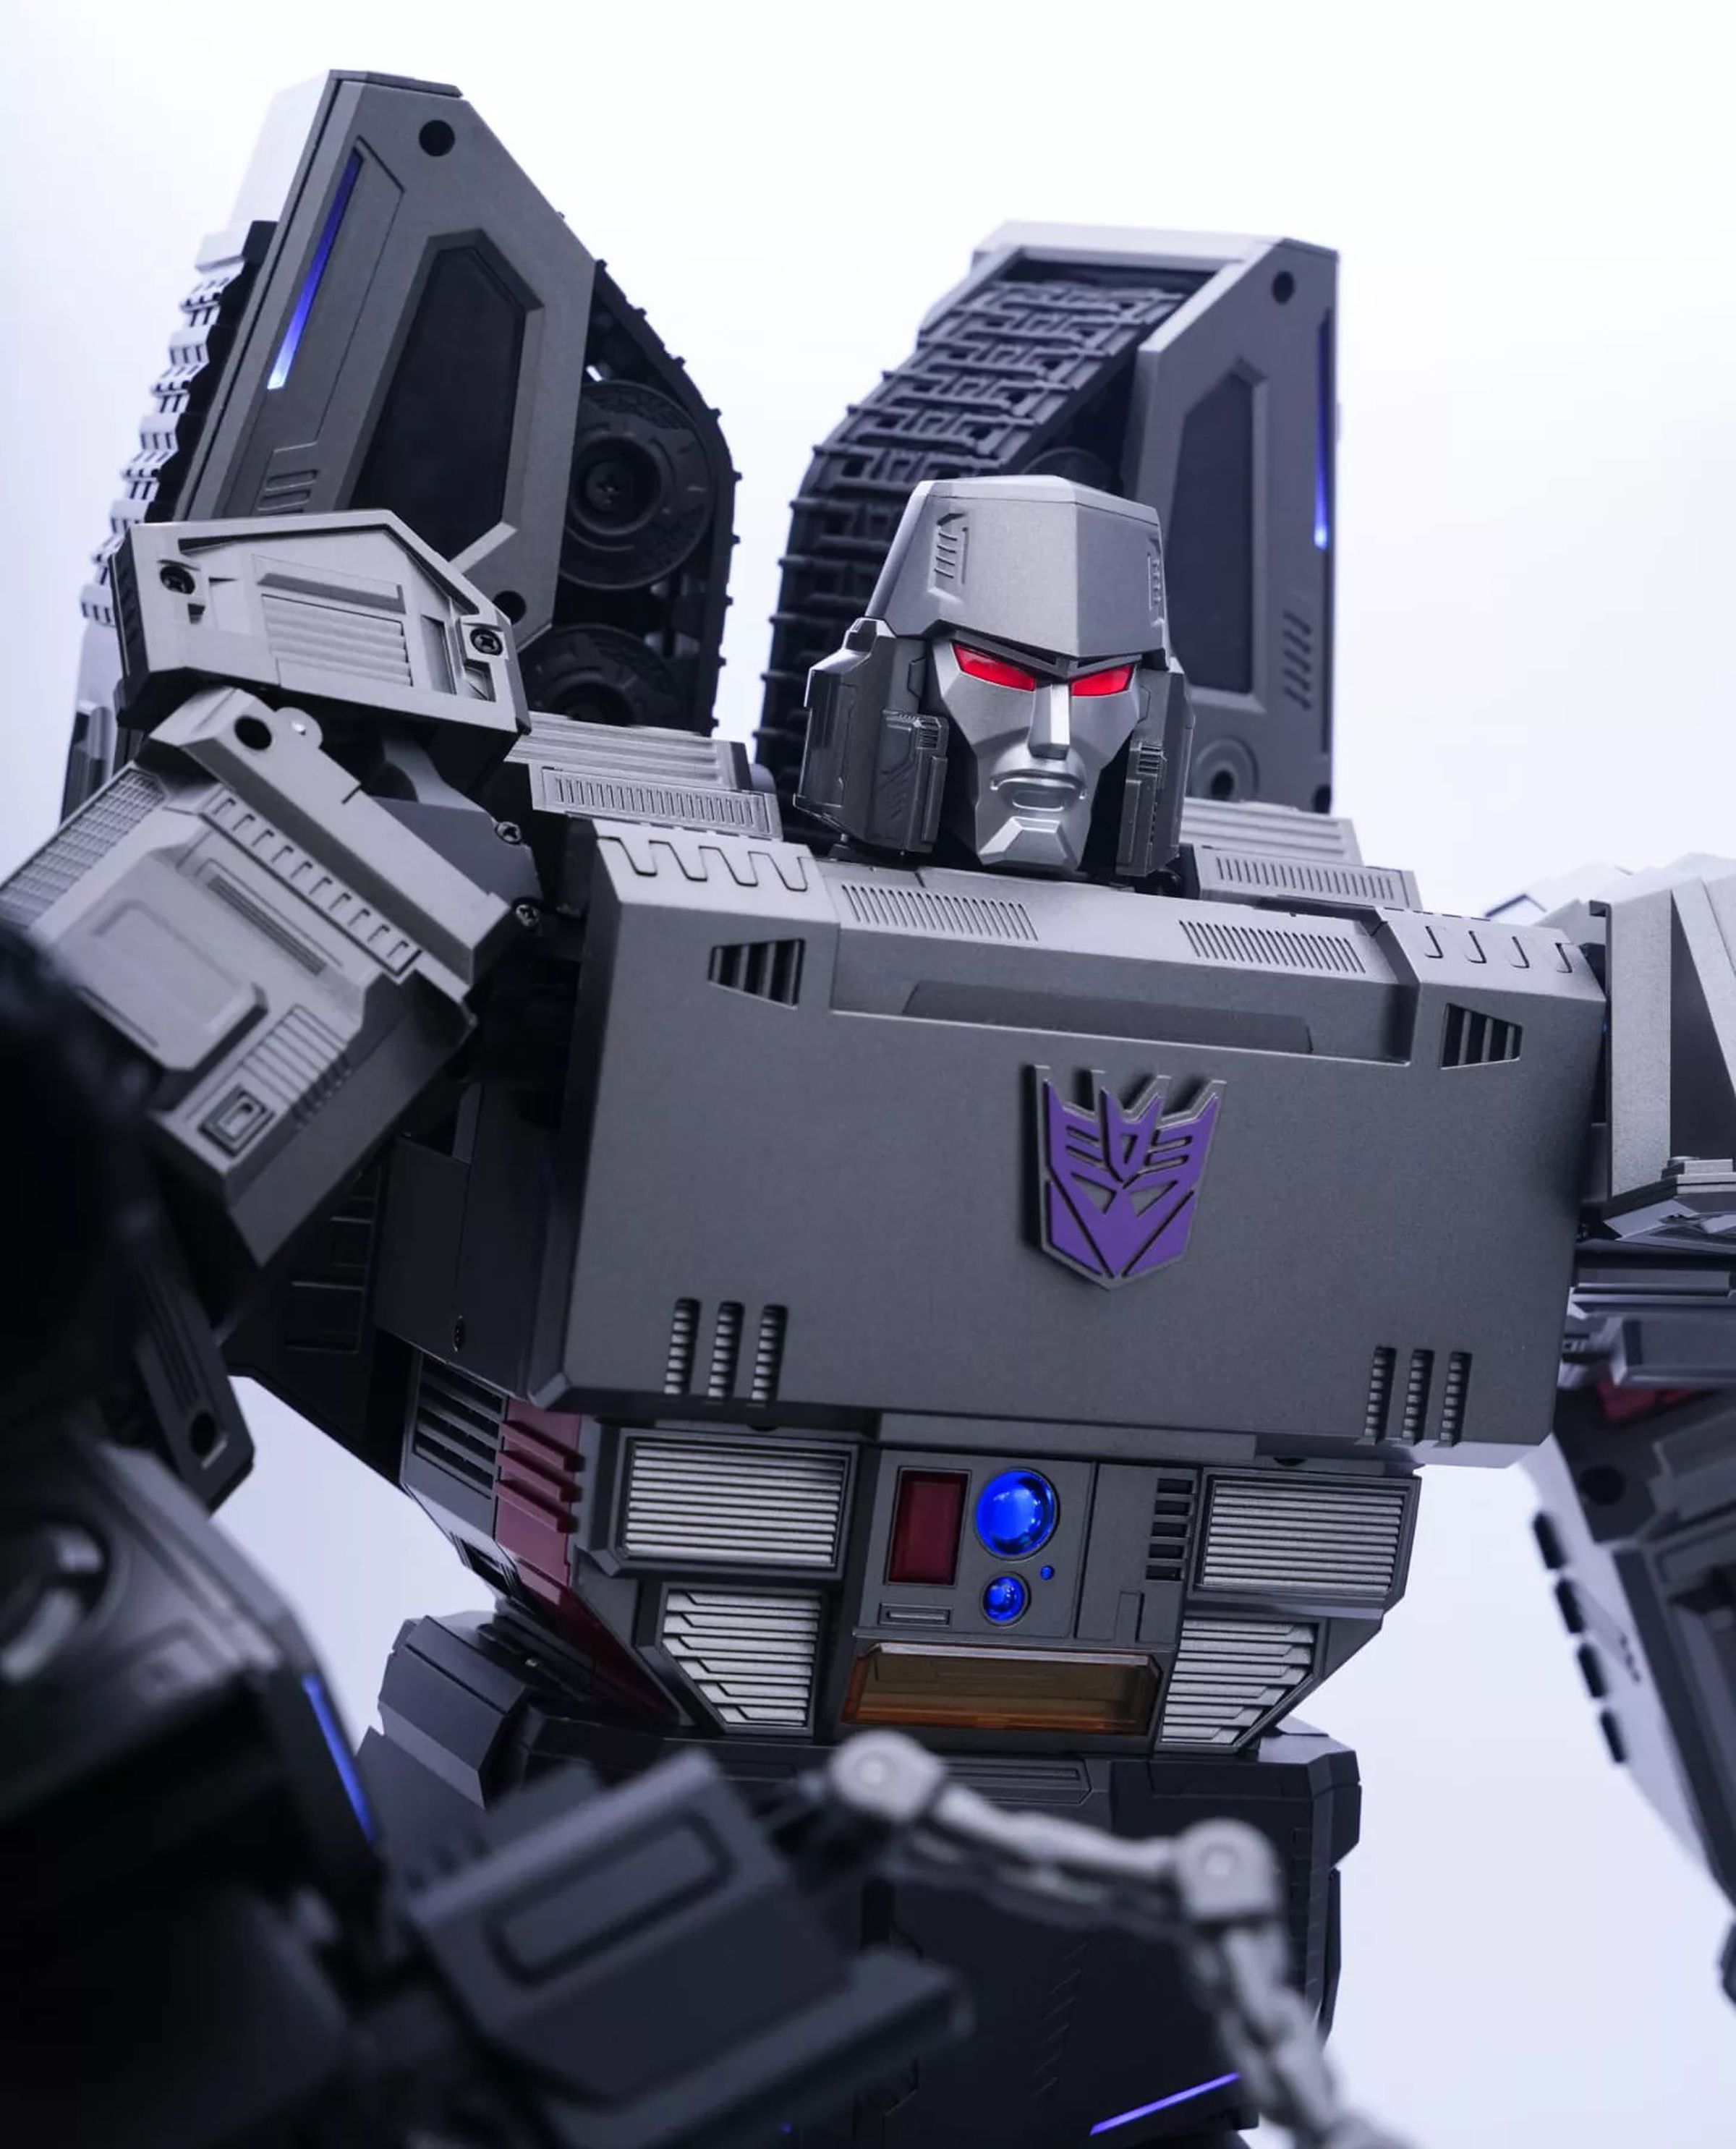 That purple Decepticon logo even automatically spins to the correct orientation as the bot transforms.